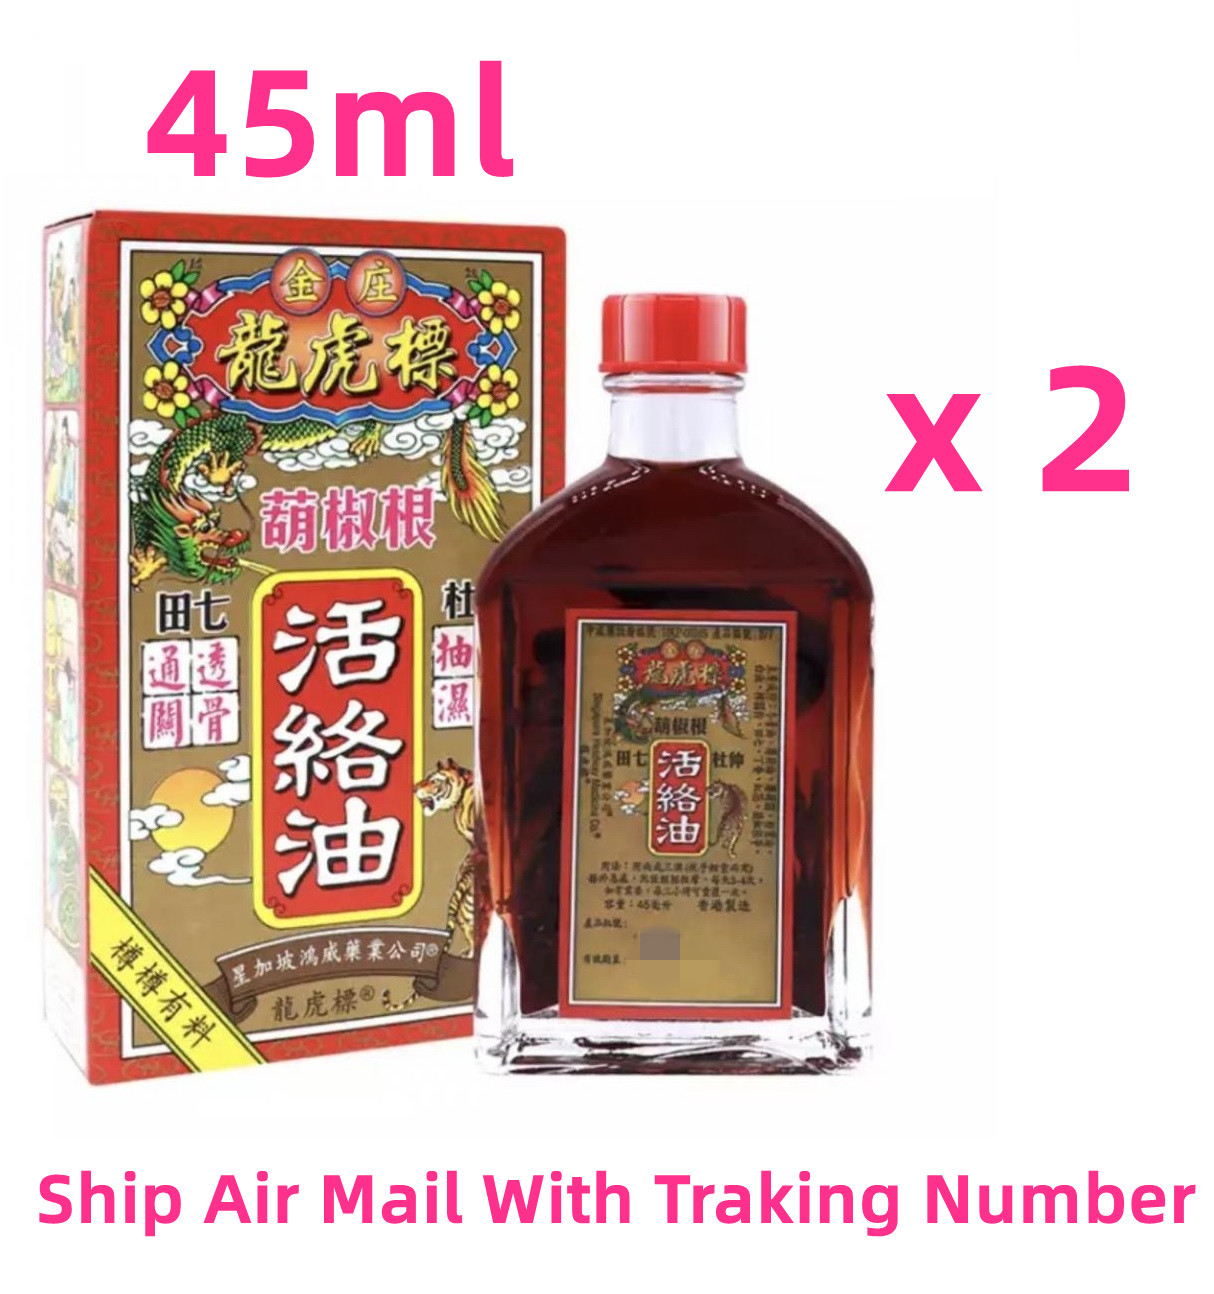 Headway Dragon Tiger Pepper Root Wood Lock Oil For Arthritis Muscular Pain x 2 - $37.00